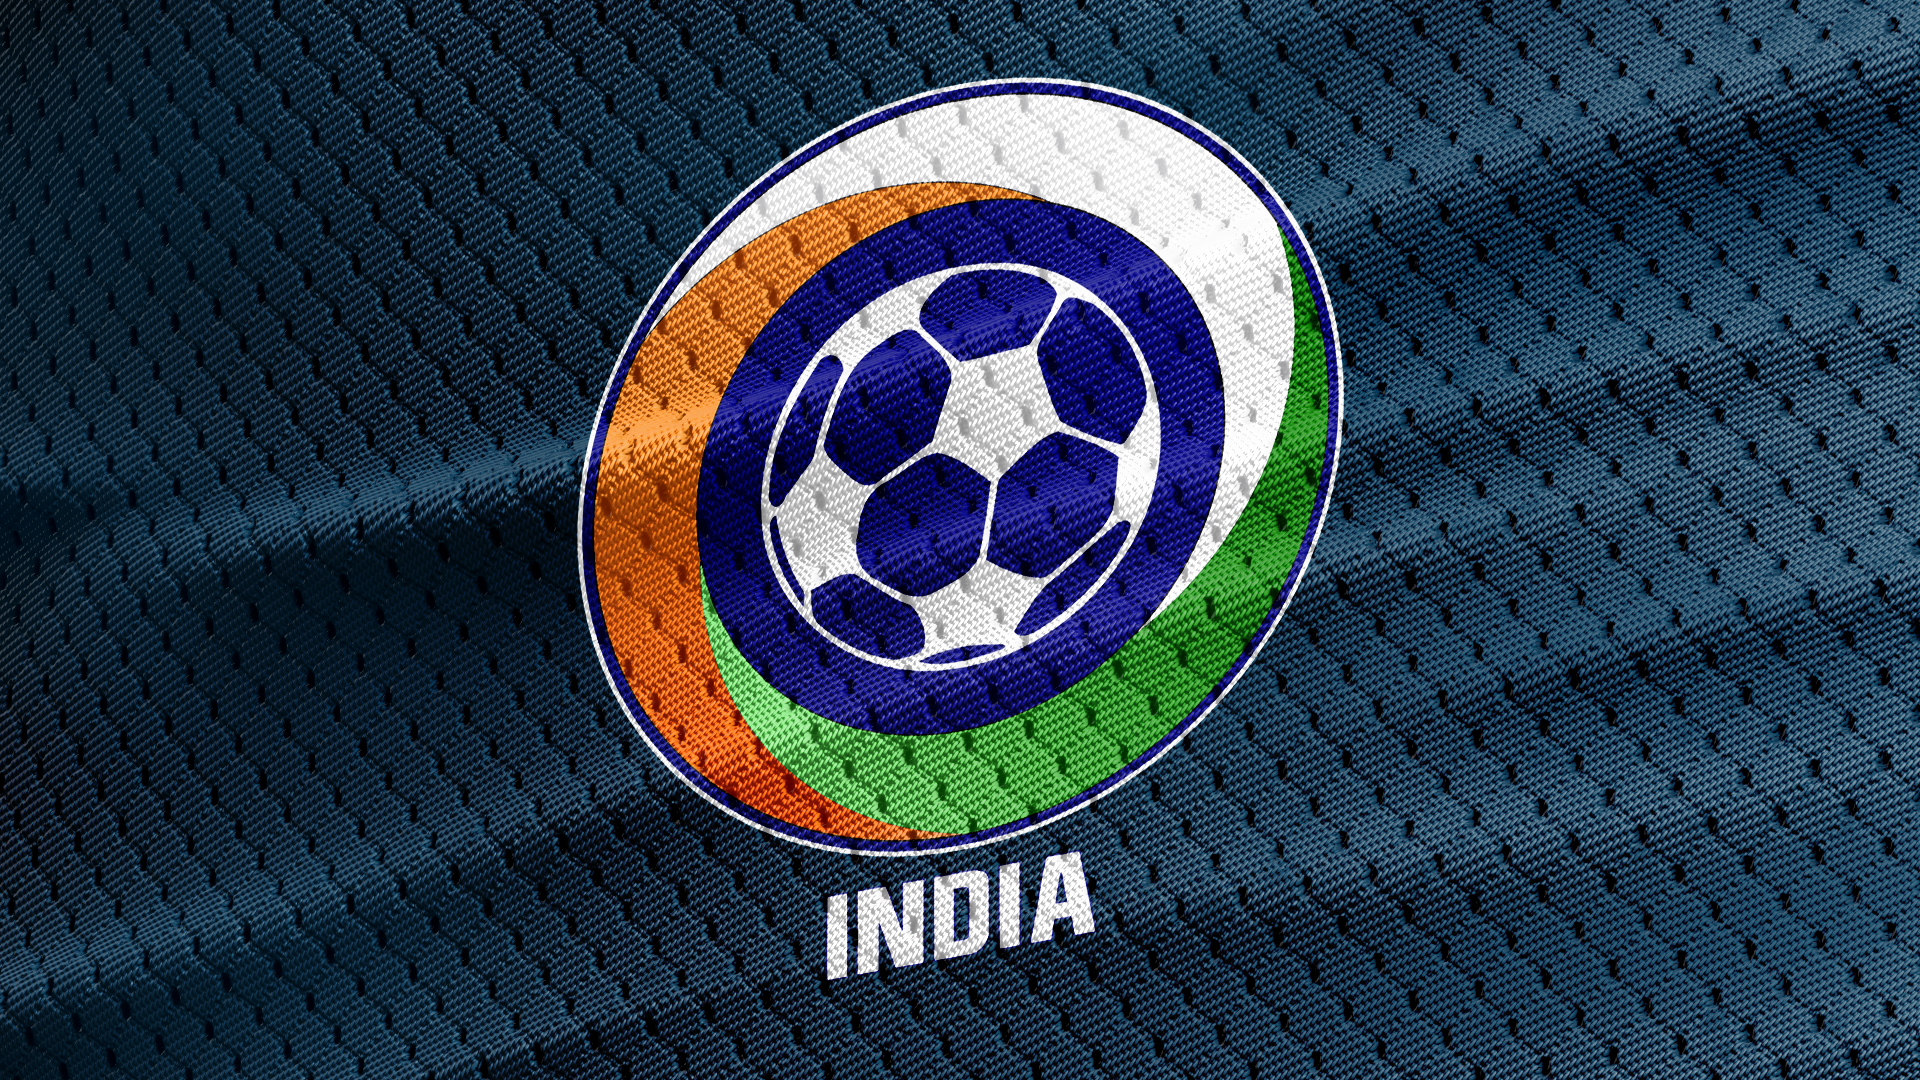 Check out our rebranding effort for the Indian Football team